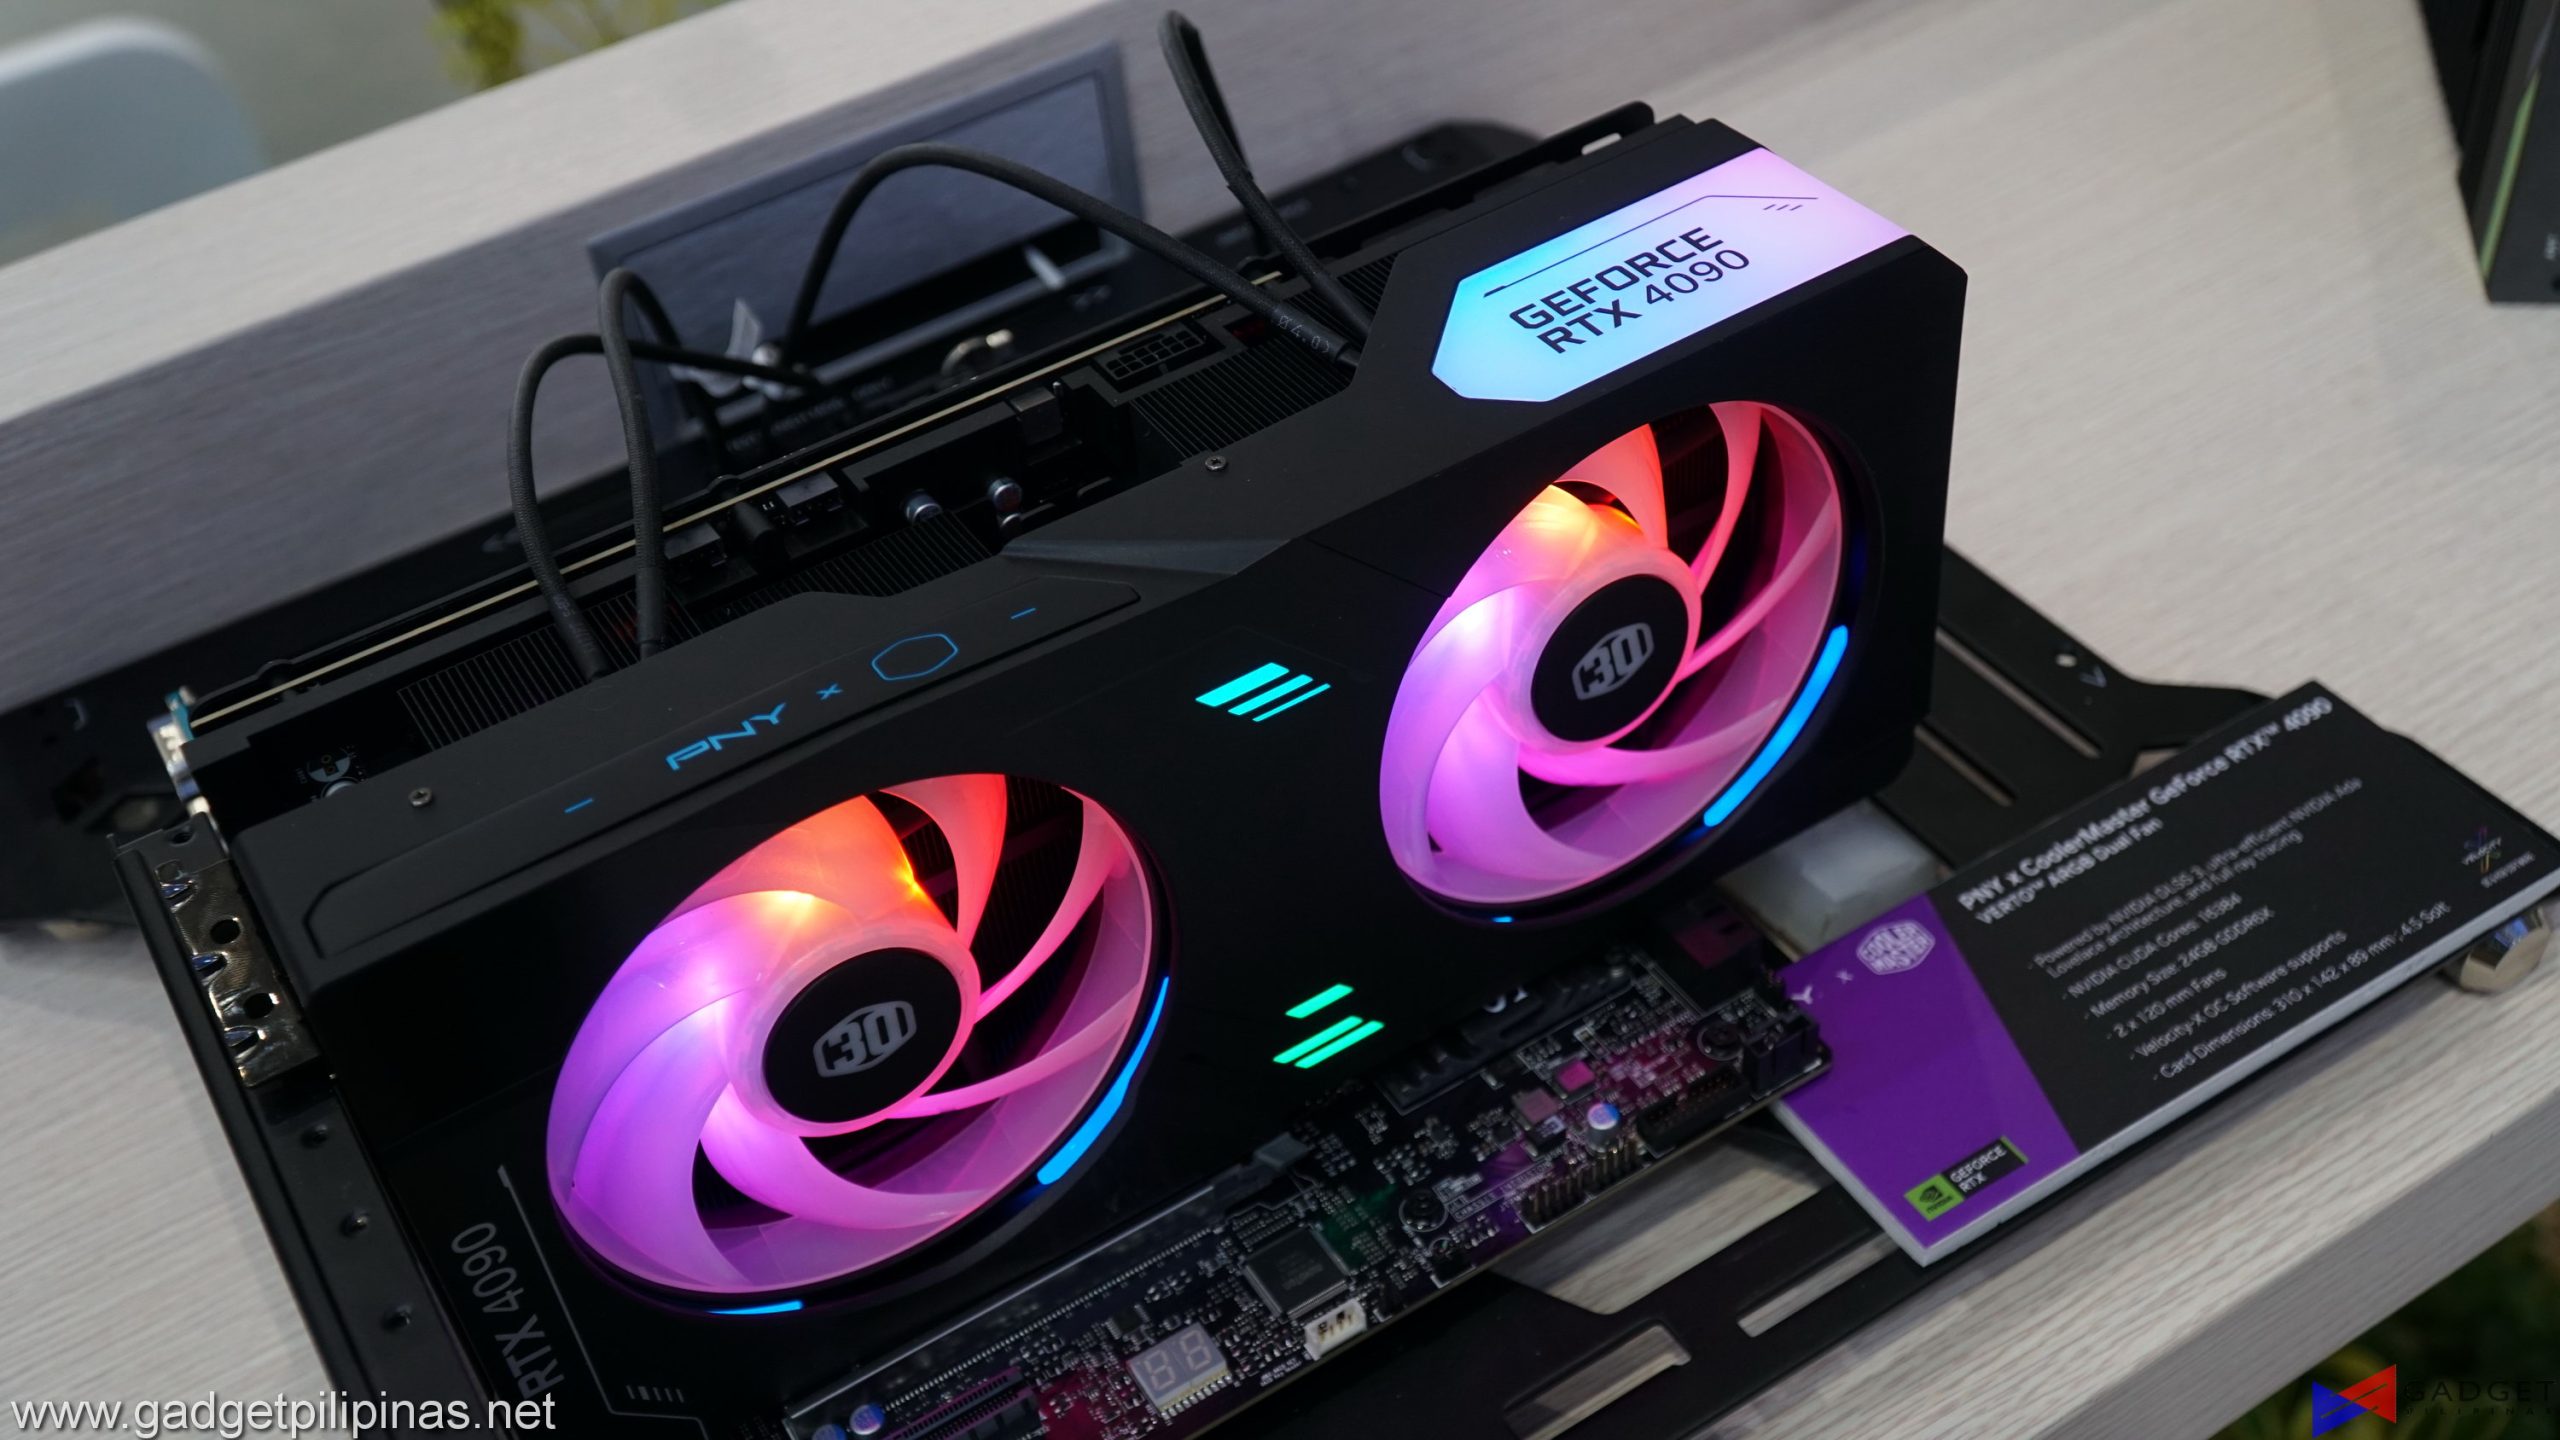 PNY x COOLER MASTER RTX 4090 Showcased At Computex 2023